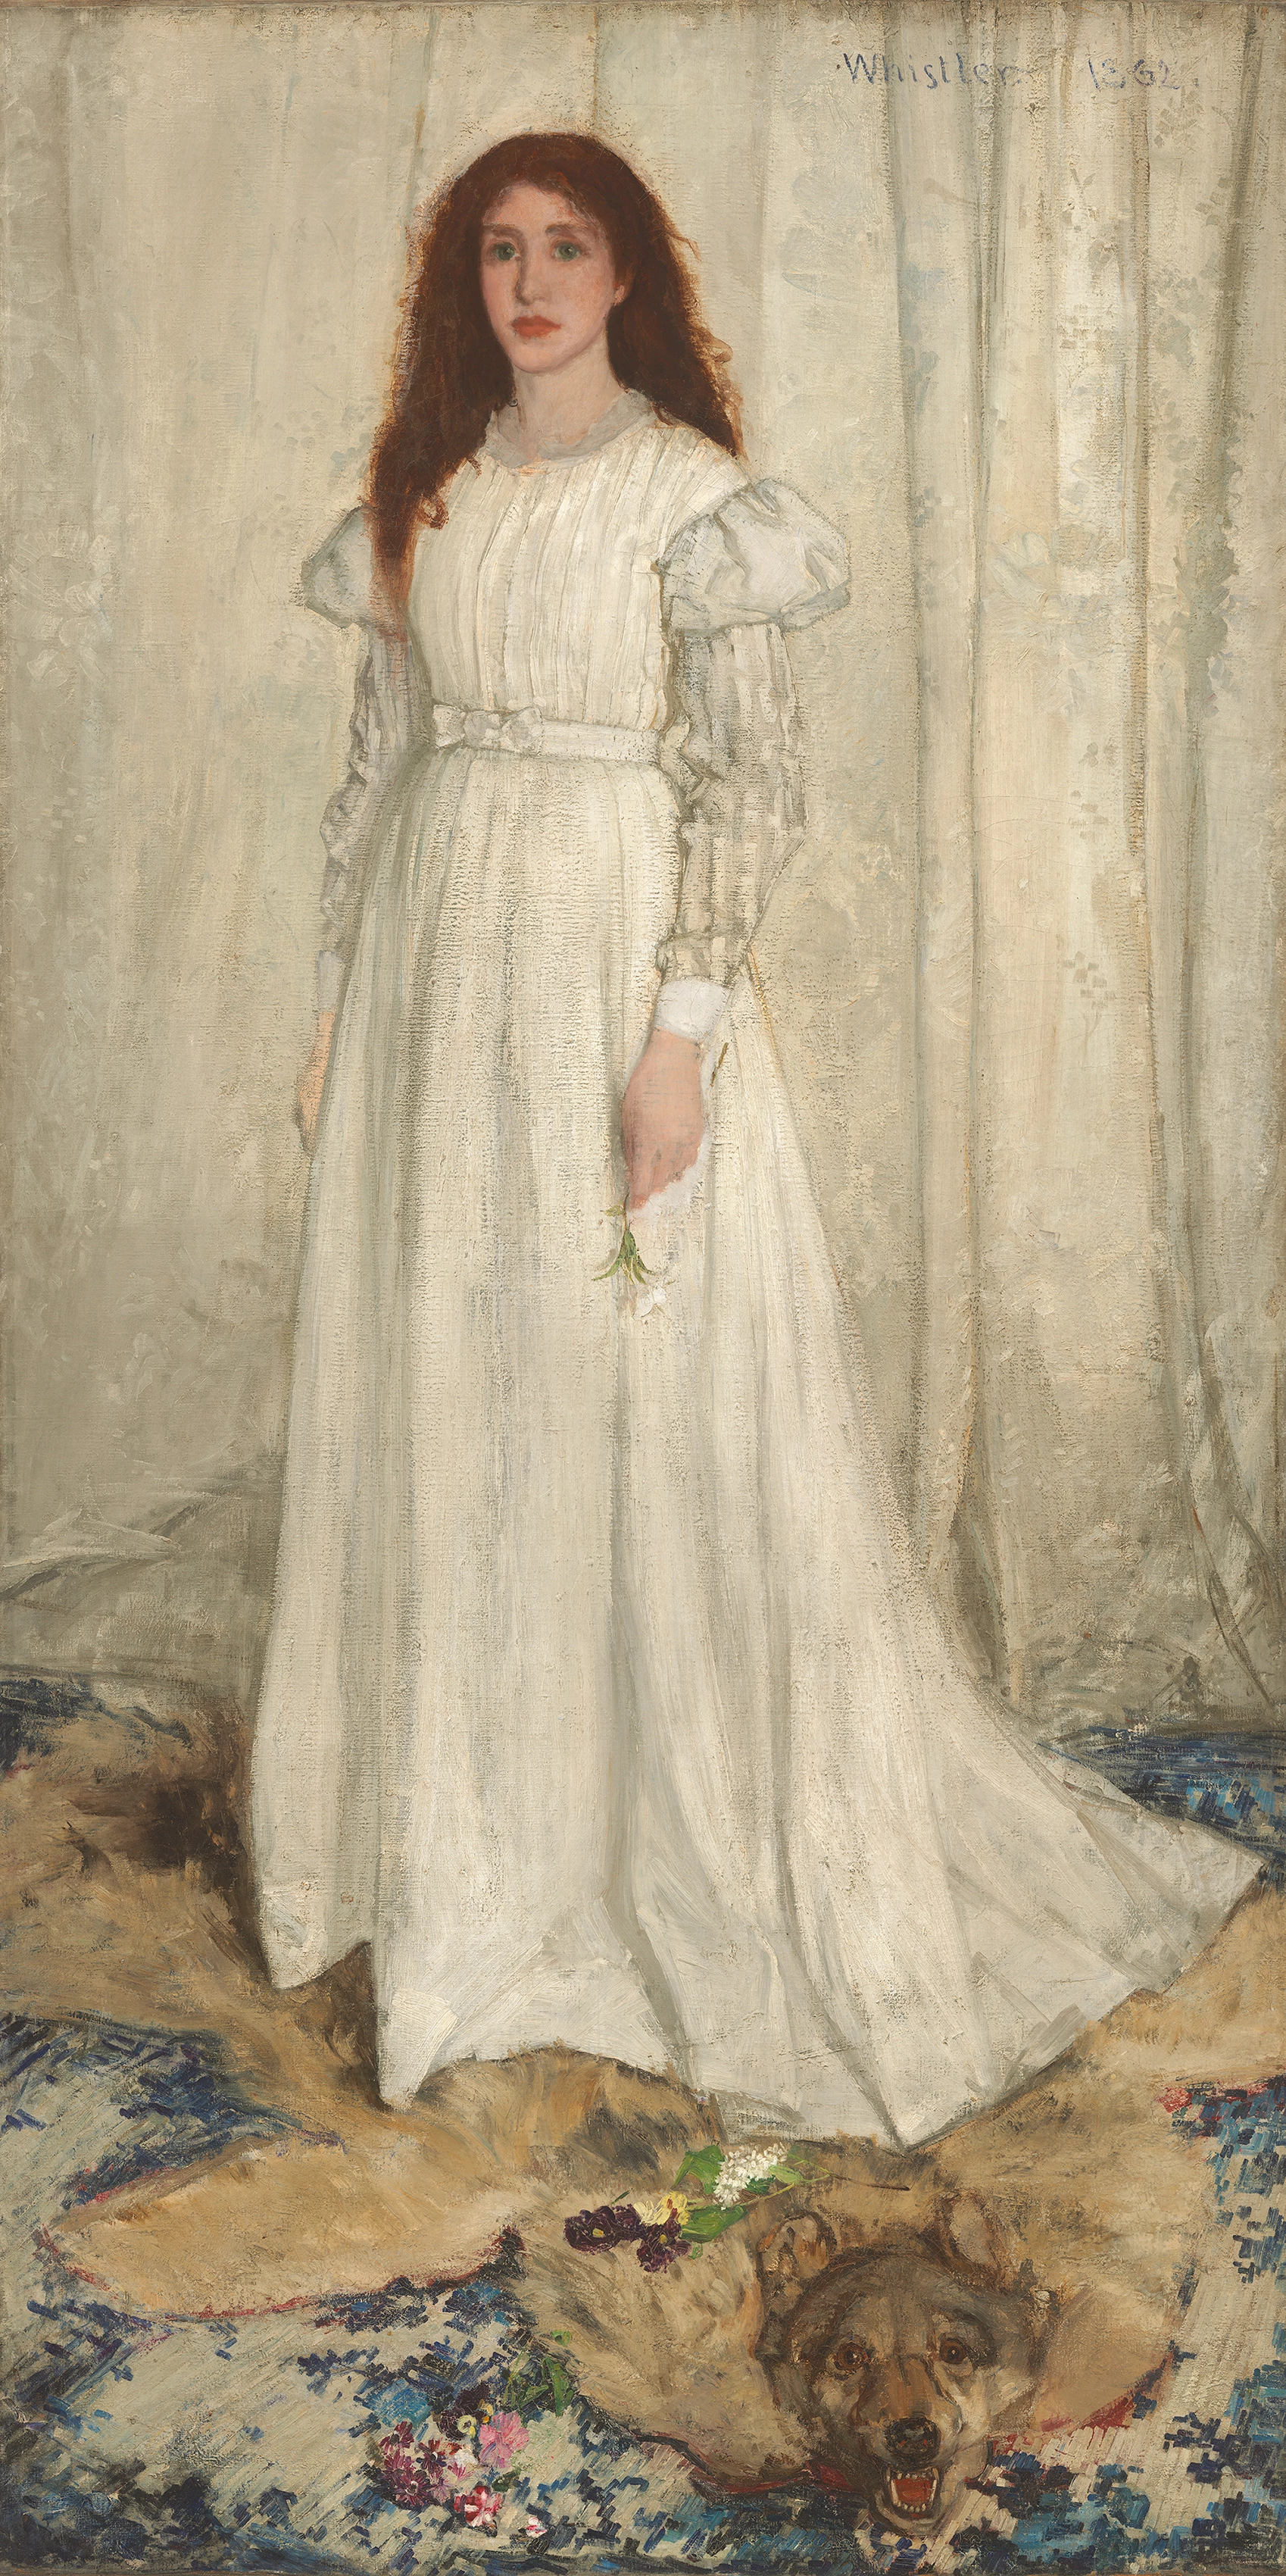 Symphony in White no 1: The White Girl, James McNeill Whistler